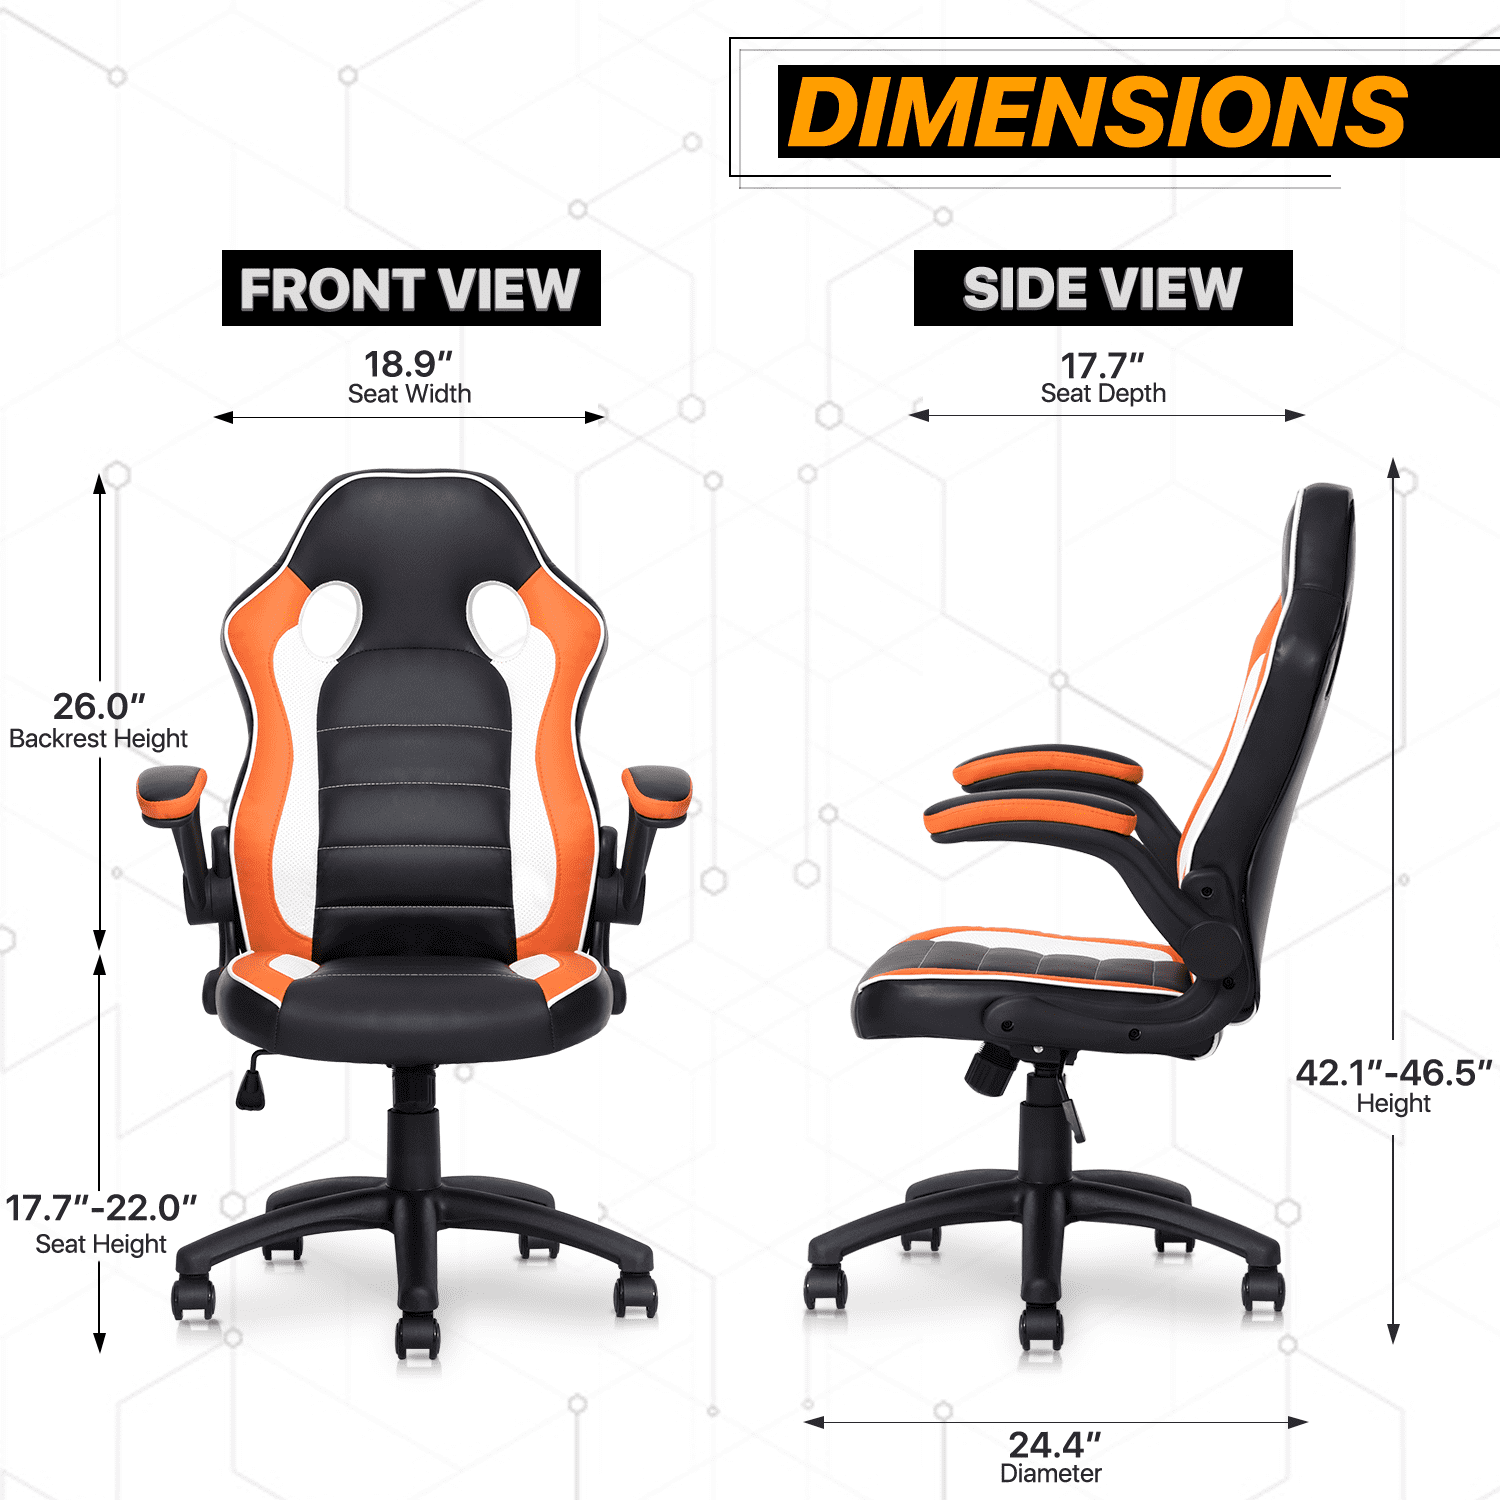 PU Leather Ergonomic Gaming Chair with Flip-up Armrests and Lumbar Sup